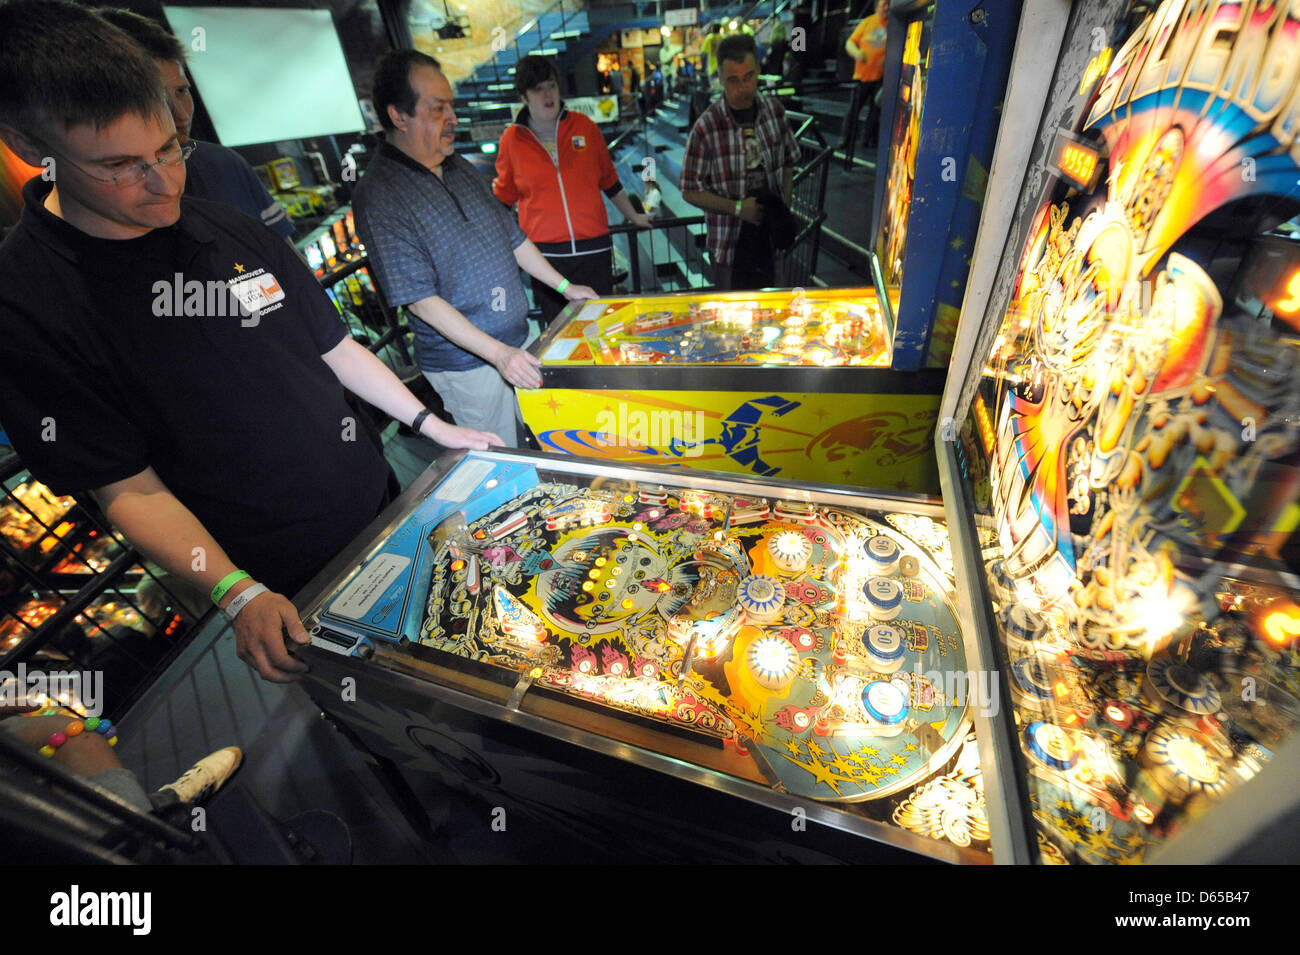 Competitors practice playing pinball prior to the German Pinball Championship, which takes place at the same venue in the evening, at Schlachthof in Bremen, Germabny, 16 June 2012. In a few hours from then, the new German 'Pinball Wizzard 2012' will be clear. Photo: INGO WAGNER Stock Photo